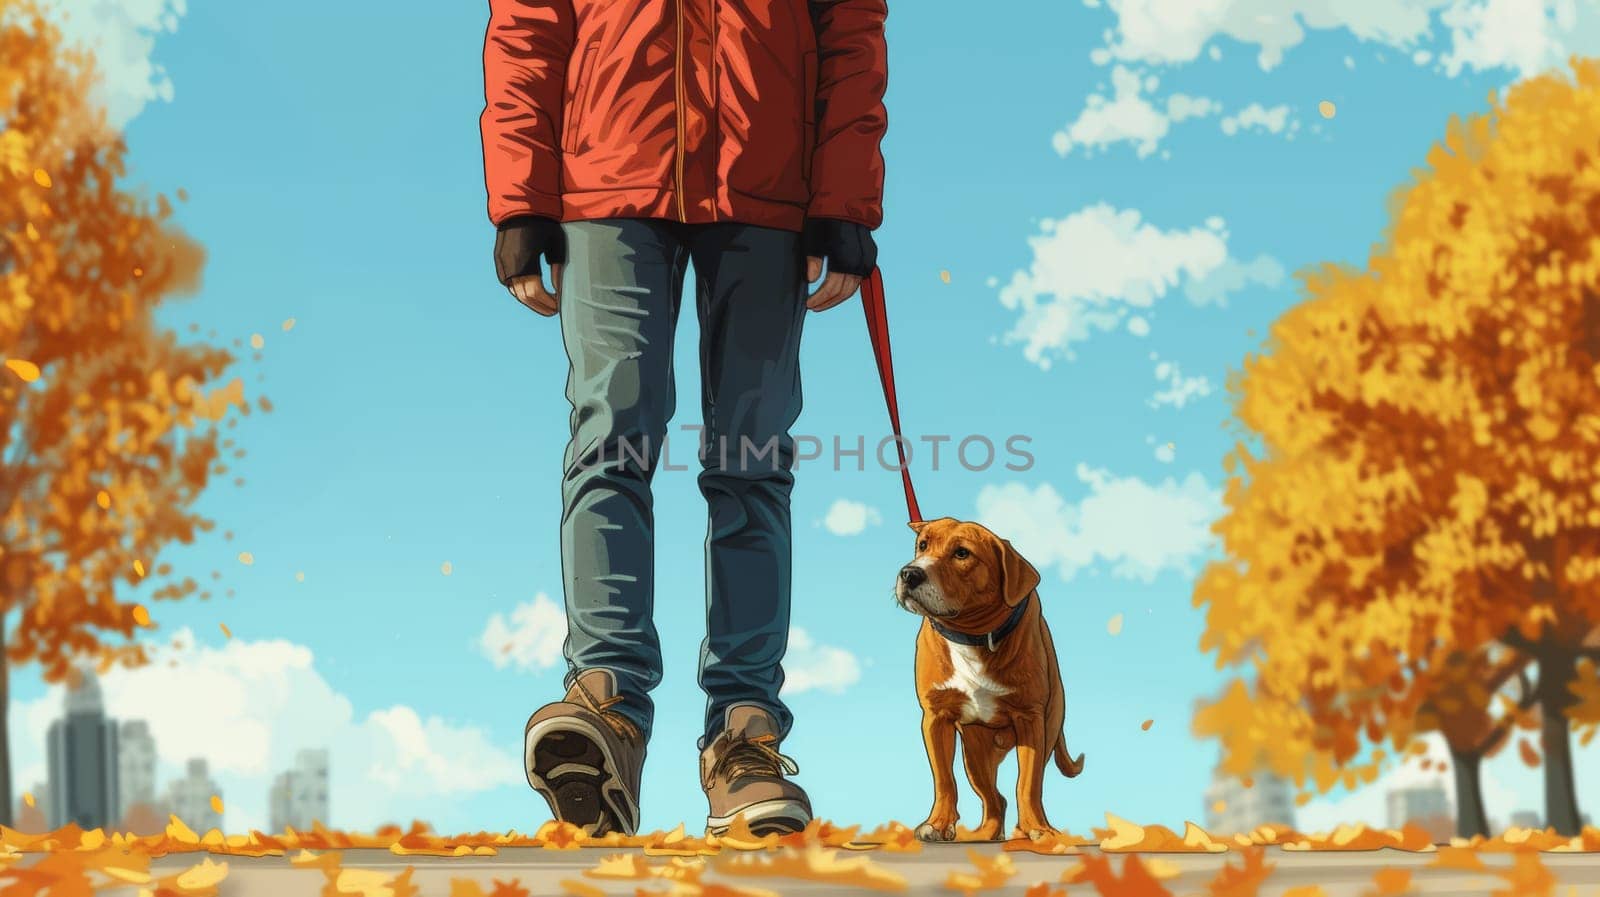 A man walking a dog in the fall leaves